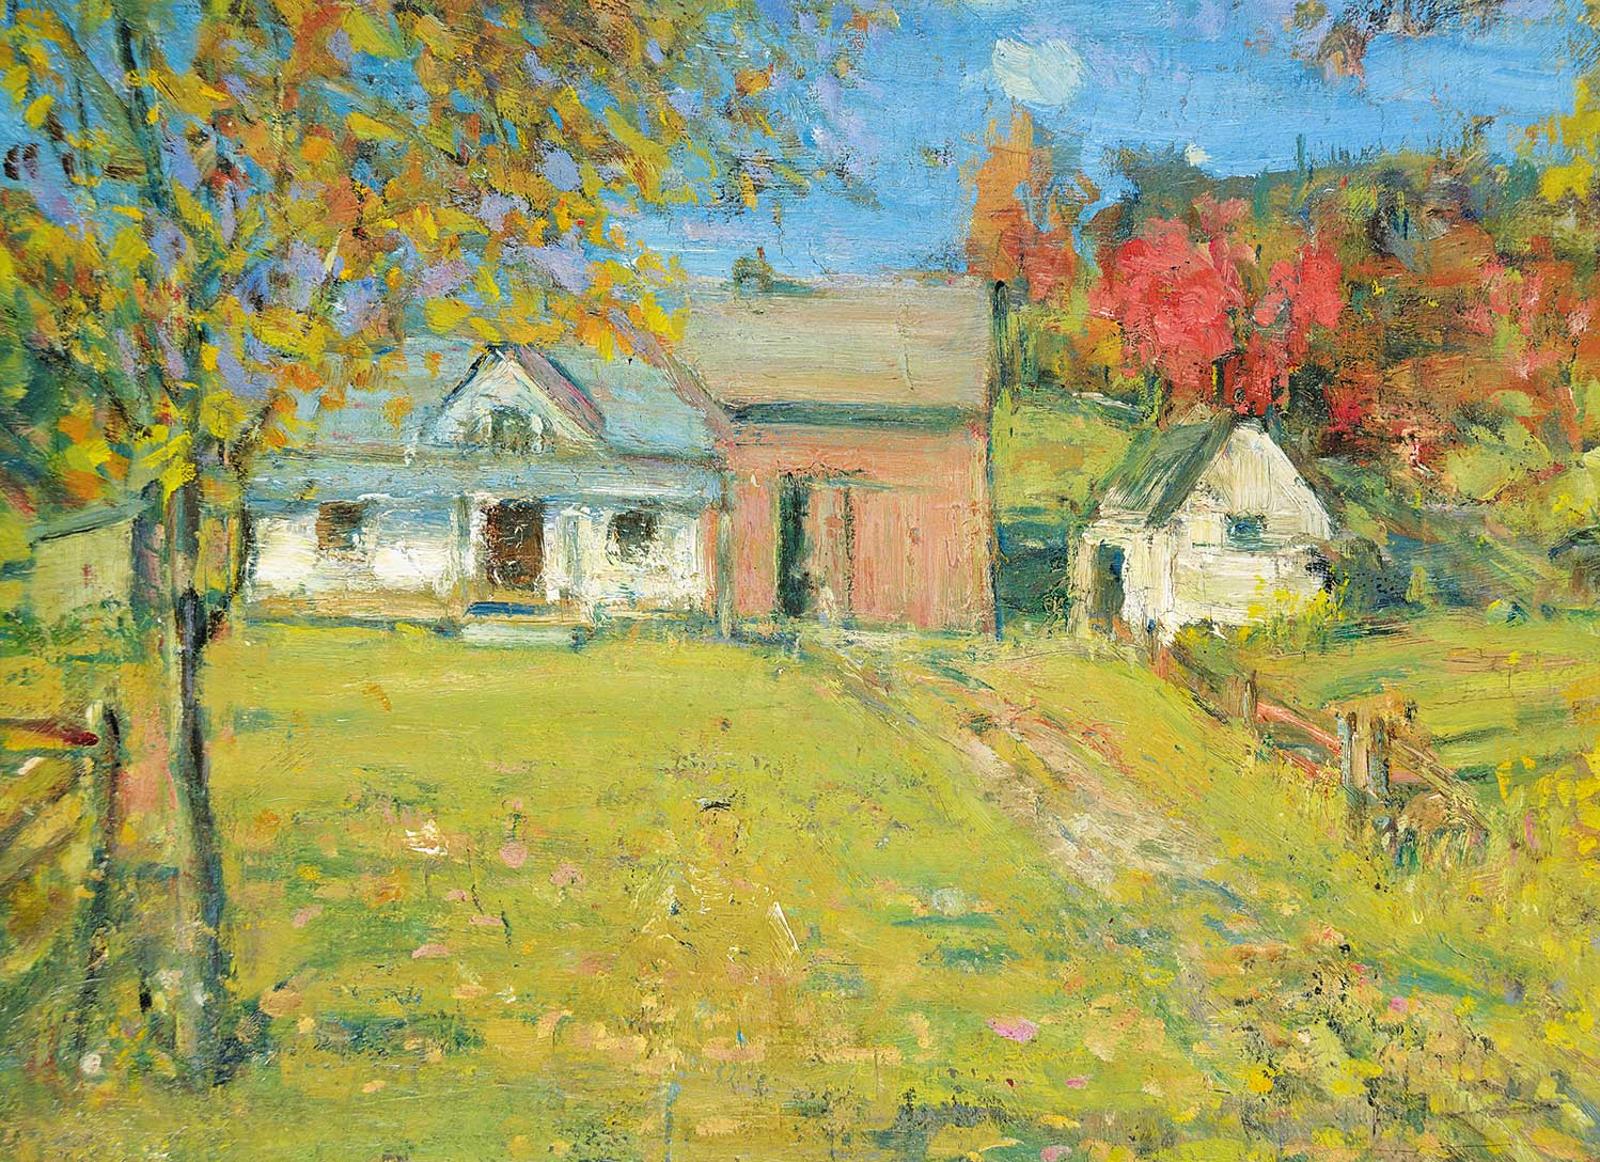 Peleg Franklin Frank Brownell (1857-1946) - Untitled - Country Farm, P.Q.